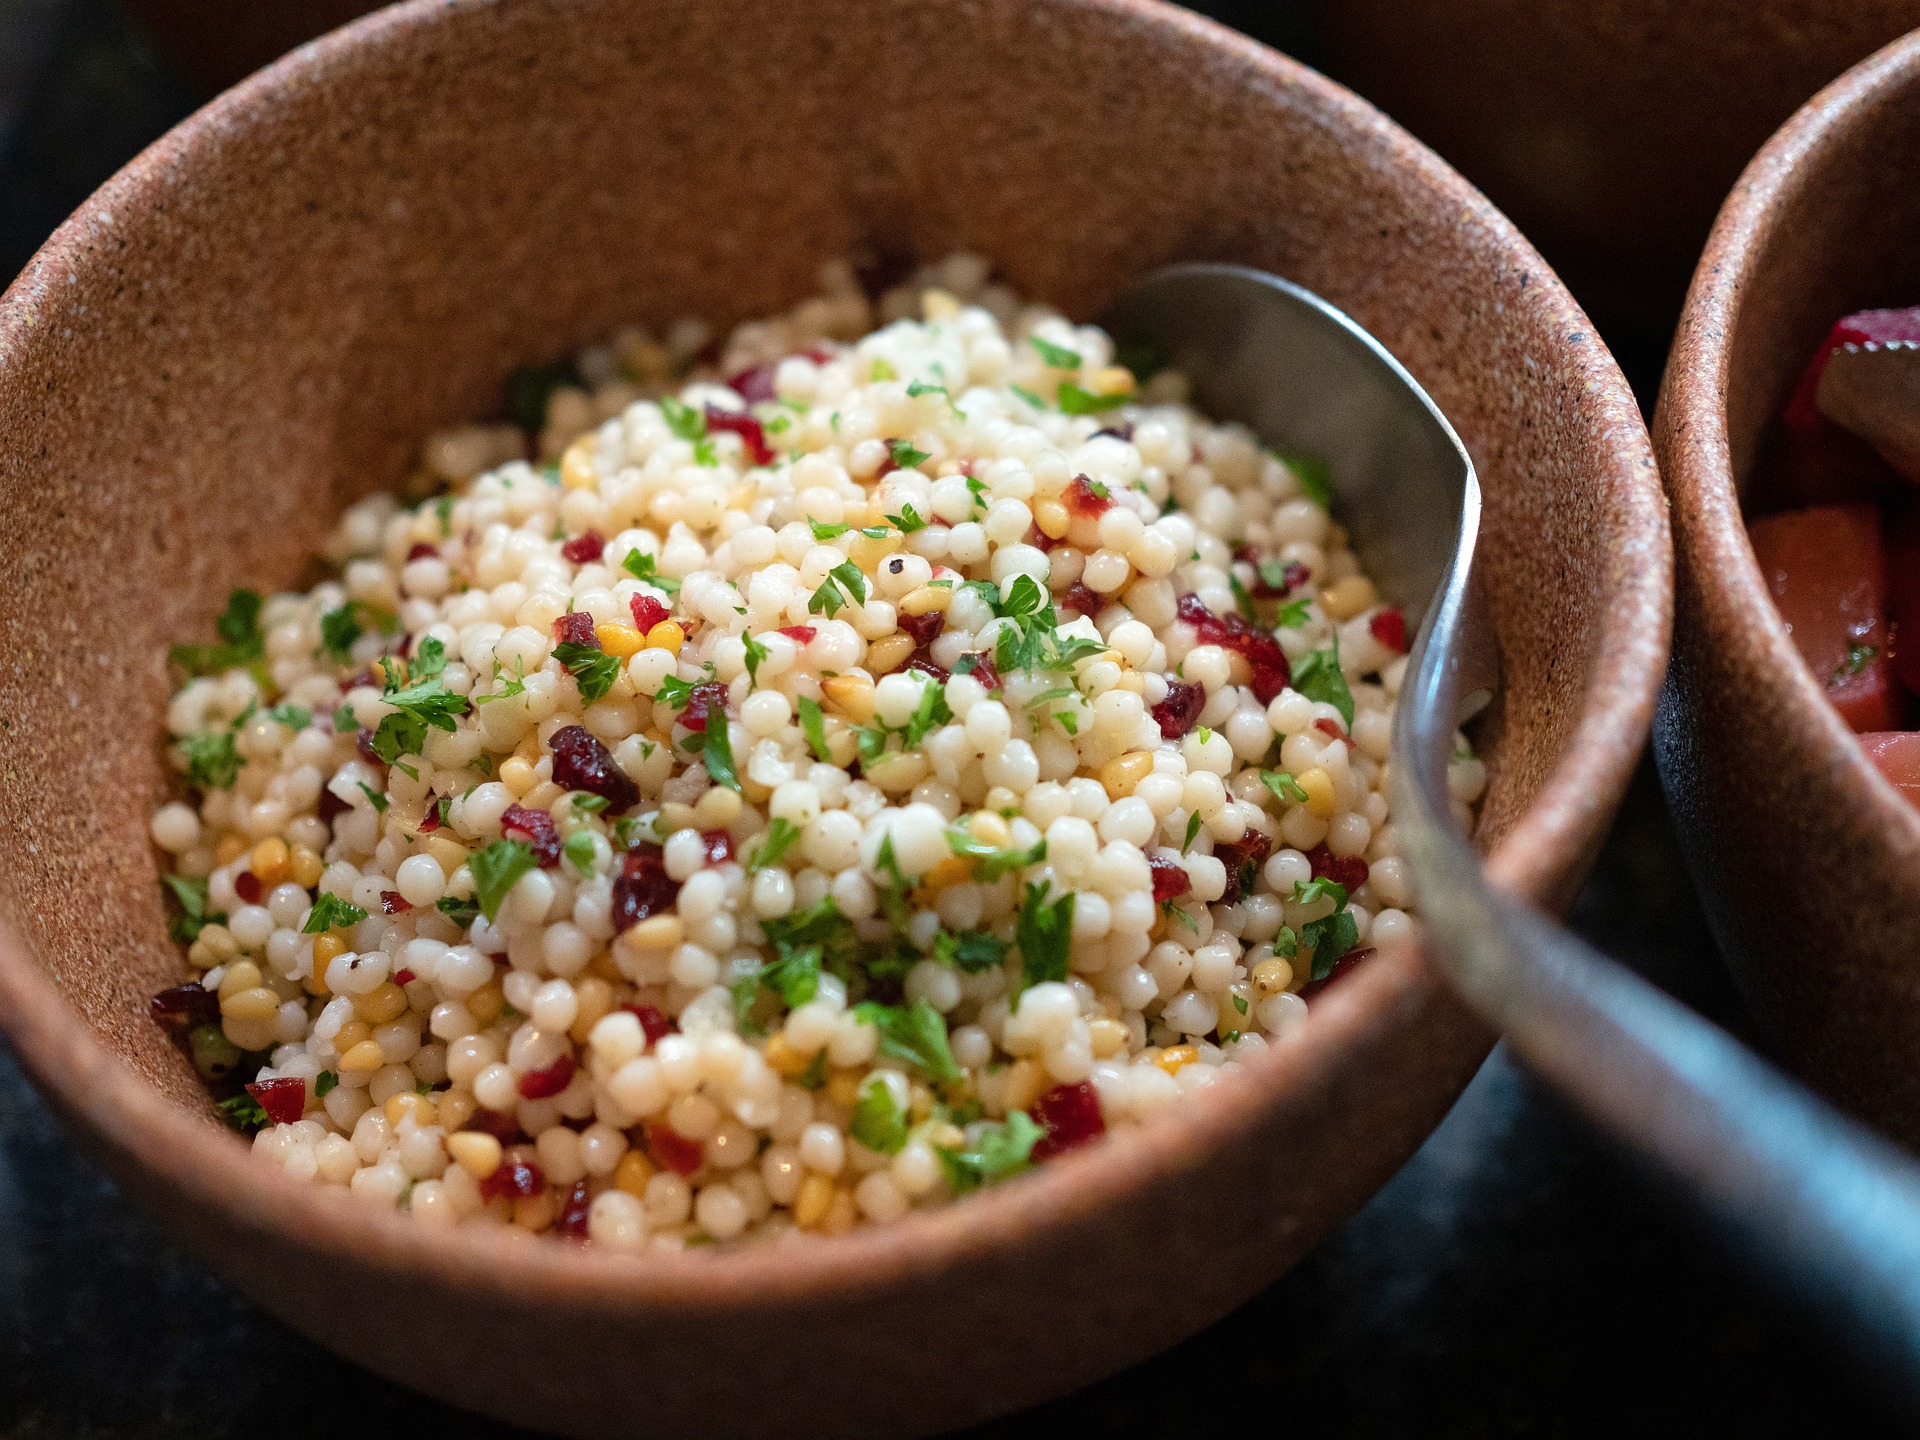 Couscous and other ingredients in a salad